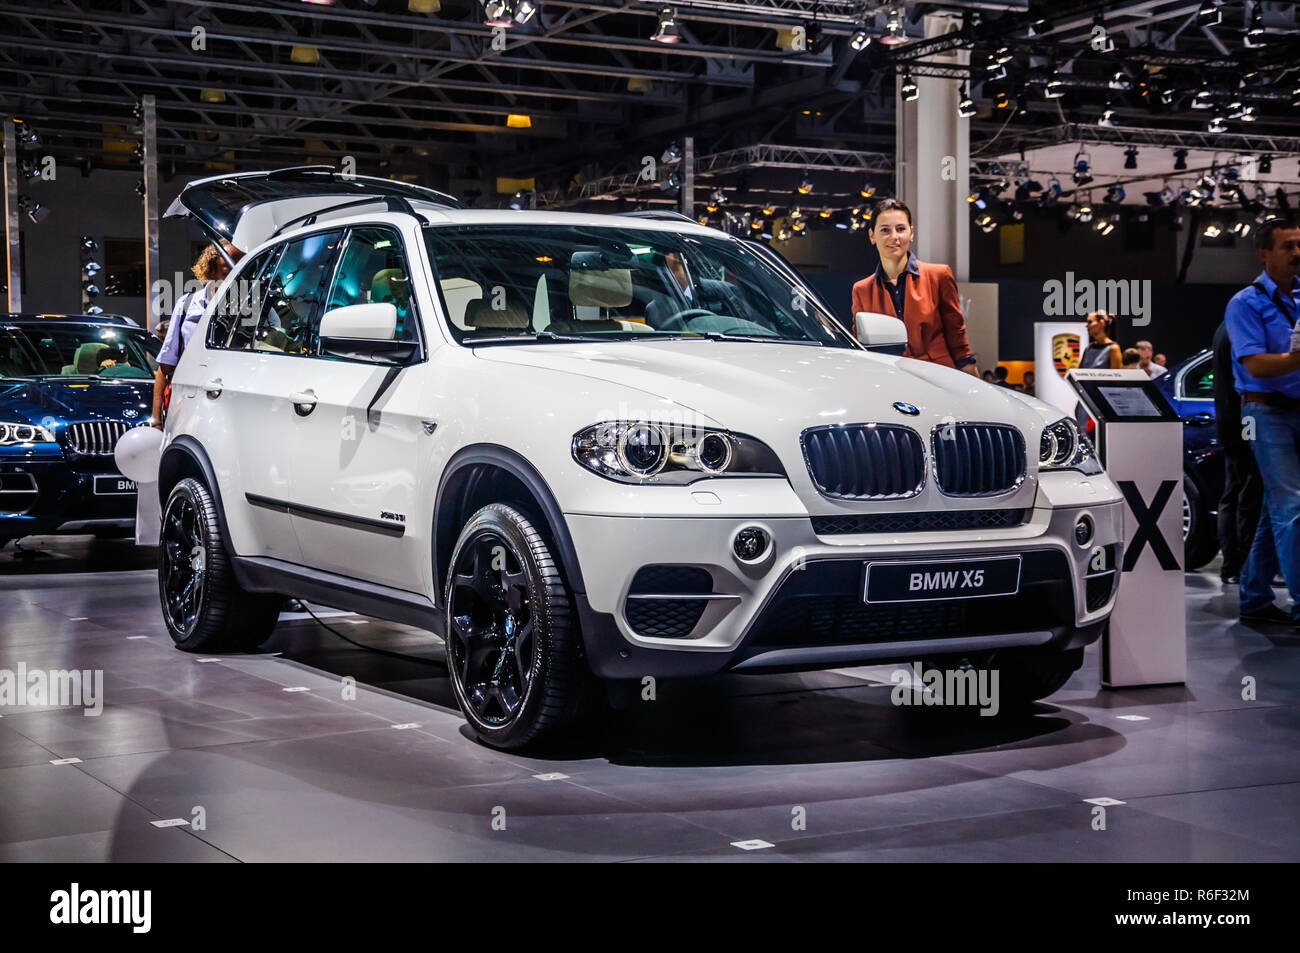 https://c8.alamy.com/comp/R6F32M/moscow-russia-aug-2012-bmw-x5-e70-presented-as-world-premiere-at-the-16th-mias-moscow-international-automobile-salon-on-august-30-2012-in-mosco-R6F32M.jpg